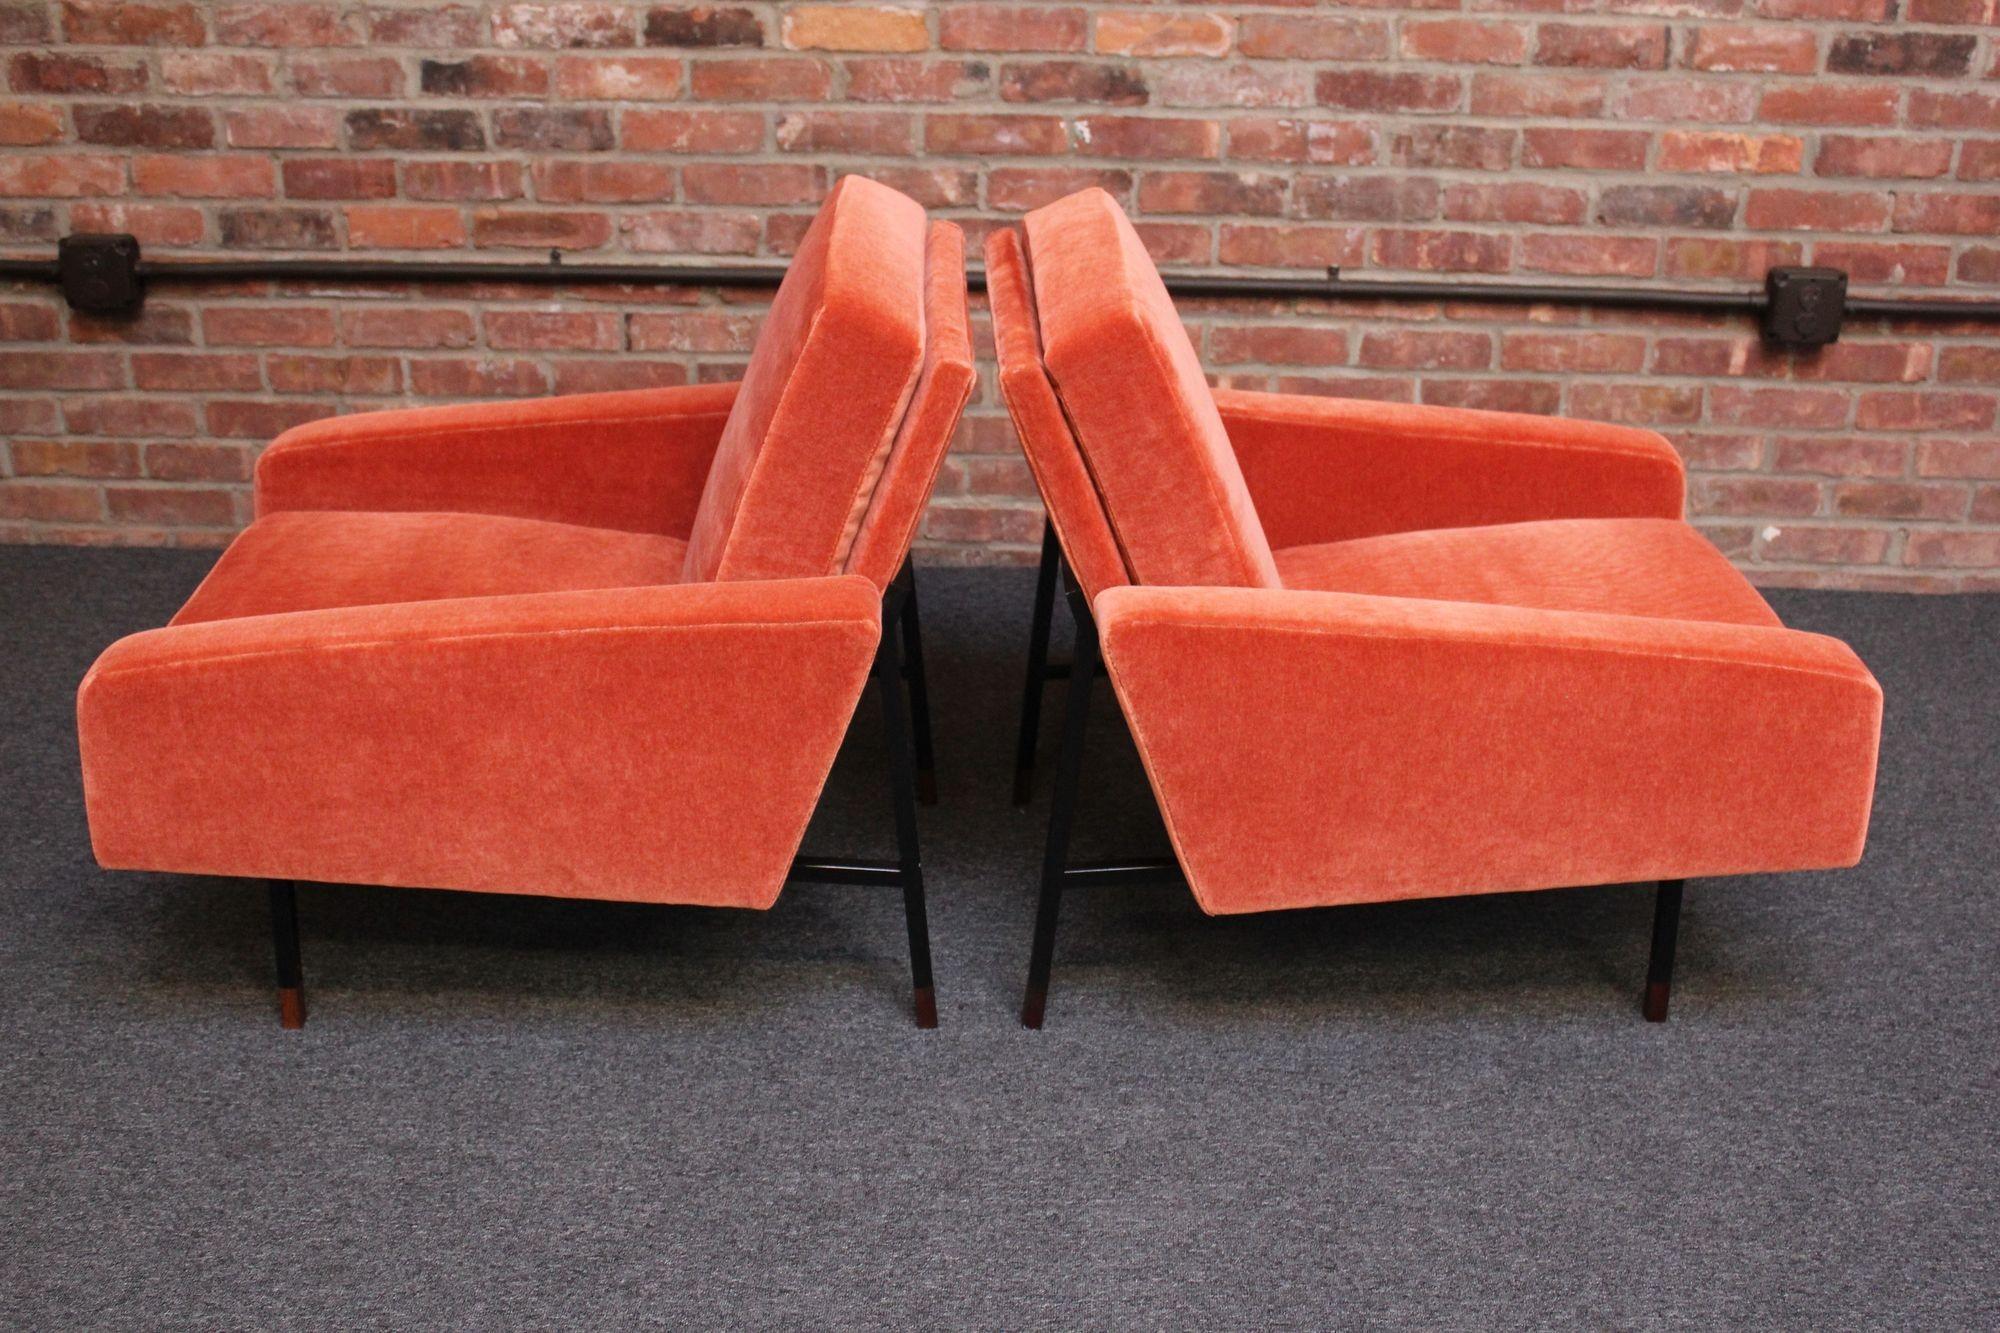 Pair of Italian Modernist Metal and Mohair Lounge Chairs by Campo and Graffi For Sale 1